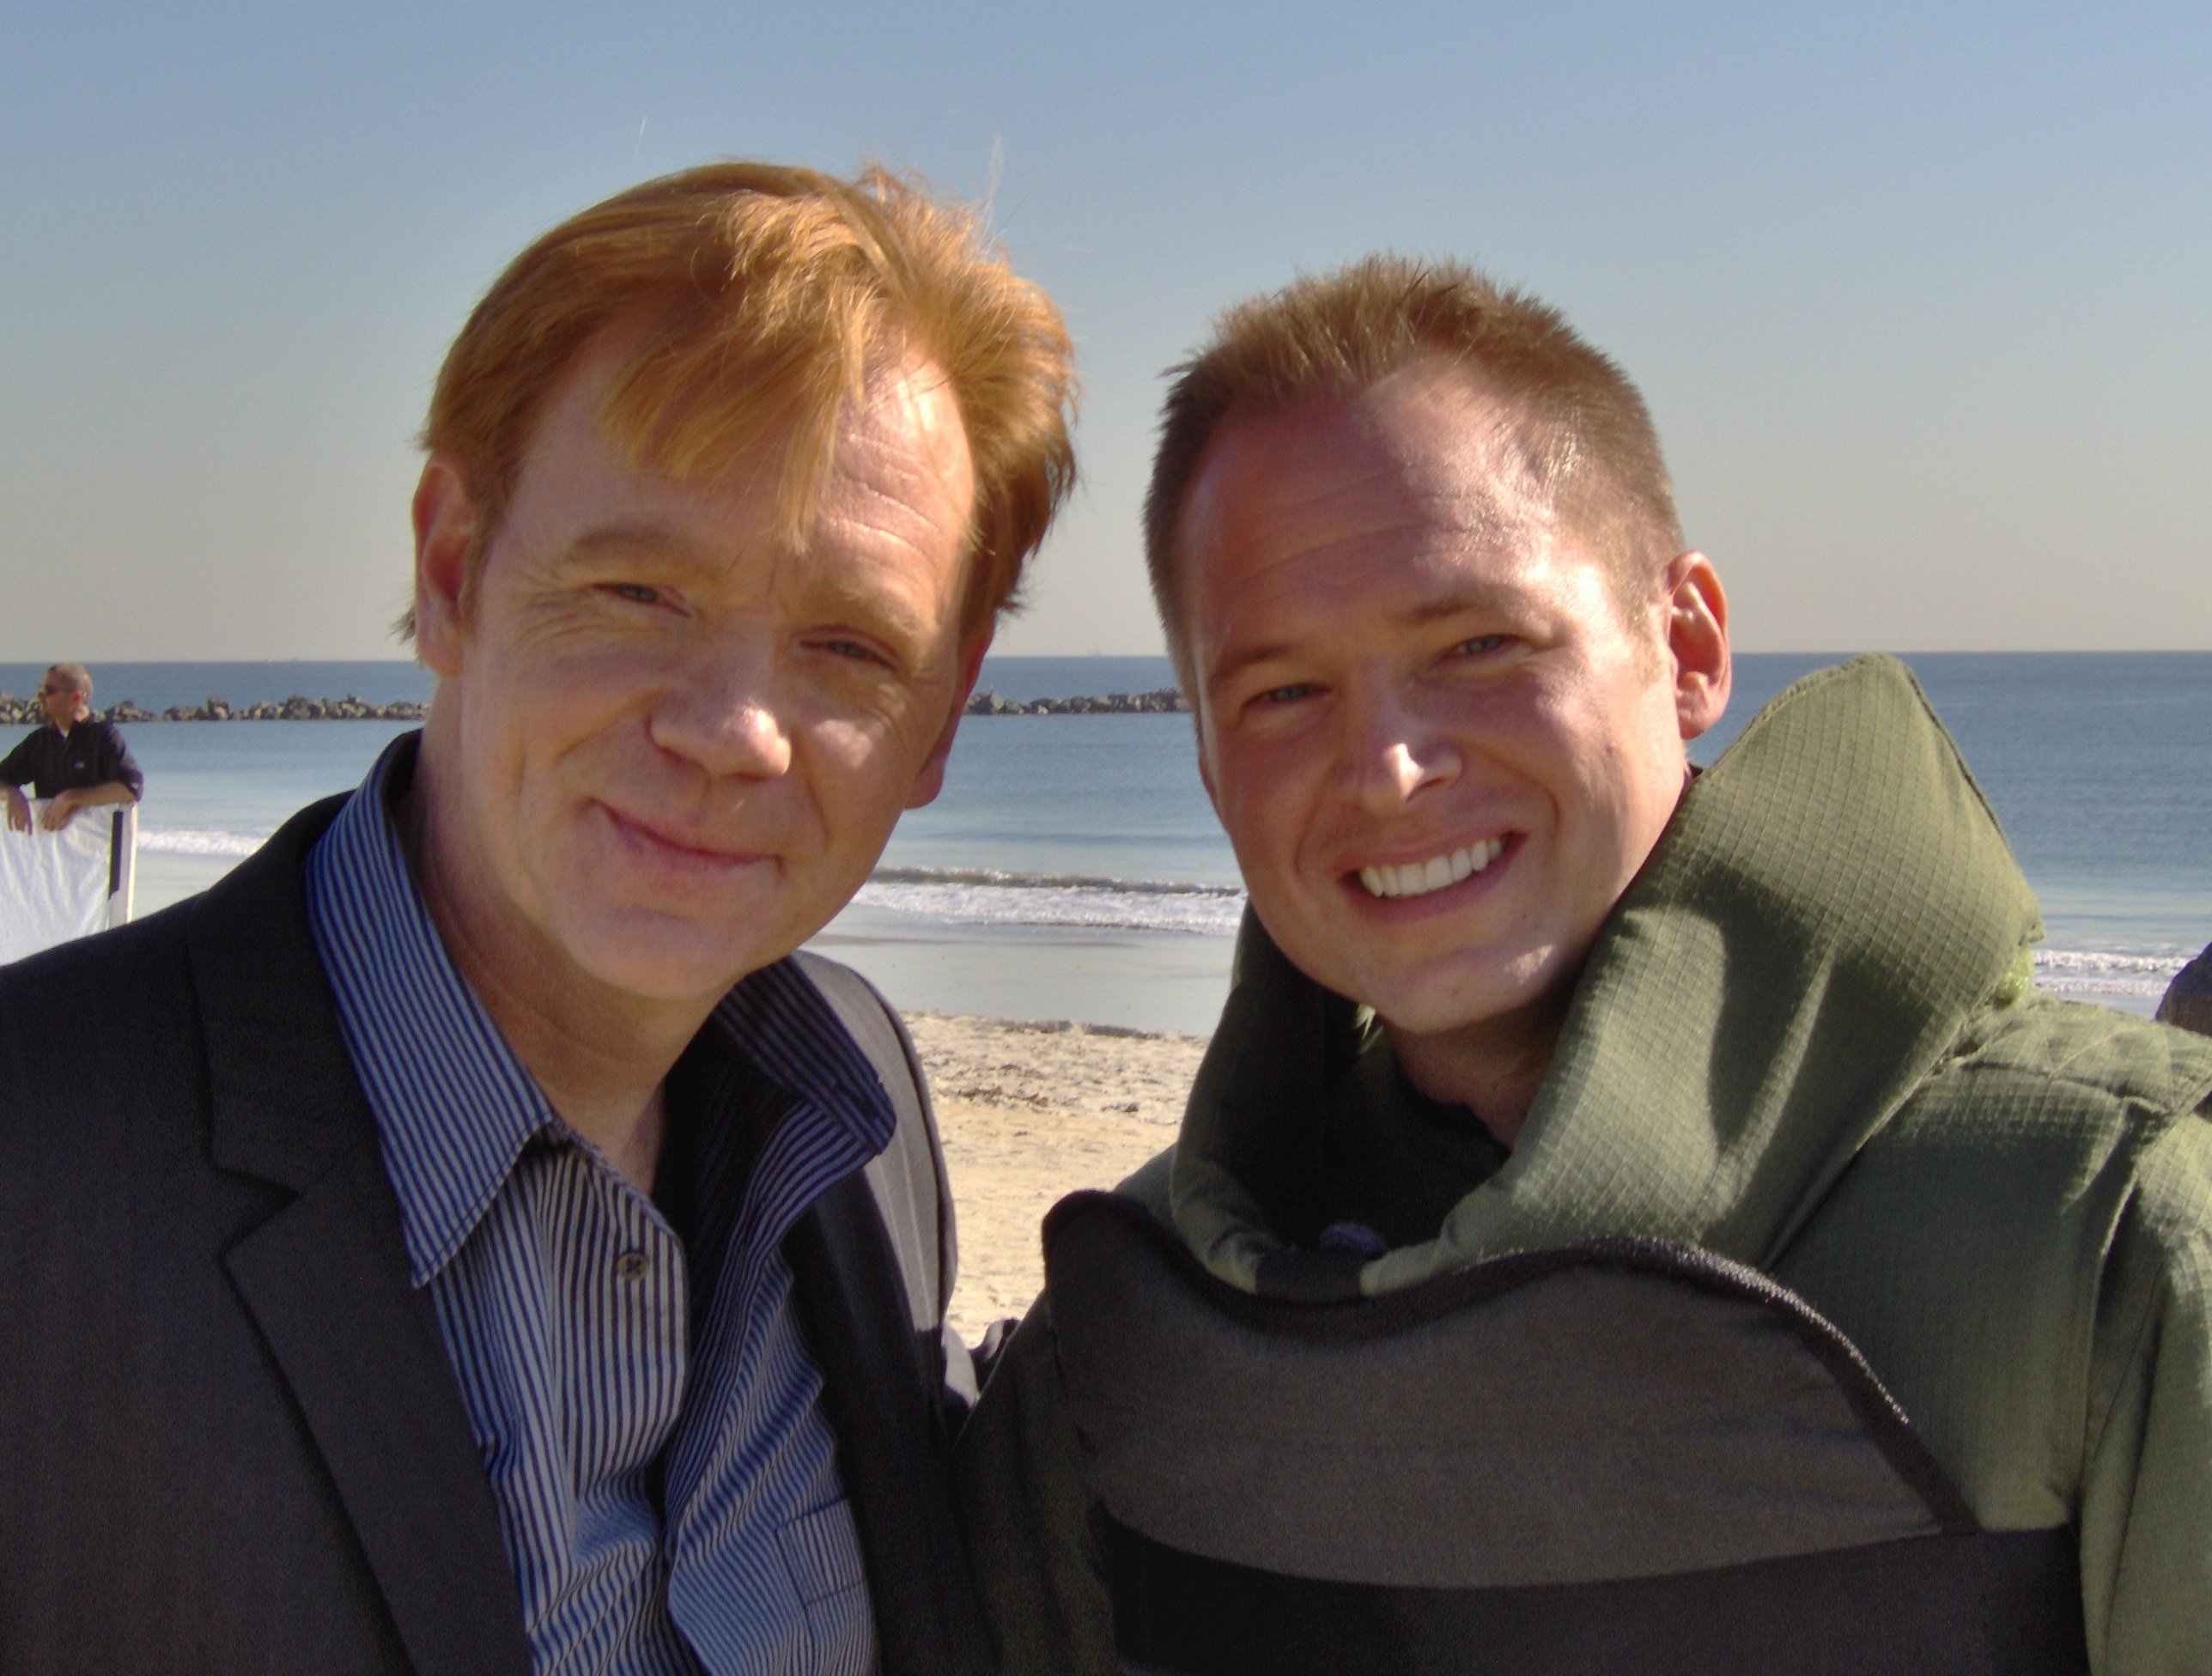 Tom McCafferty and David Caruso on the set of 